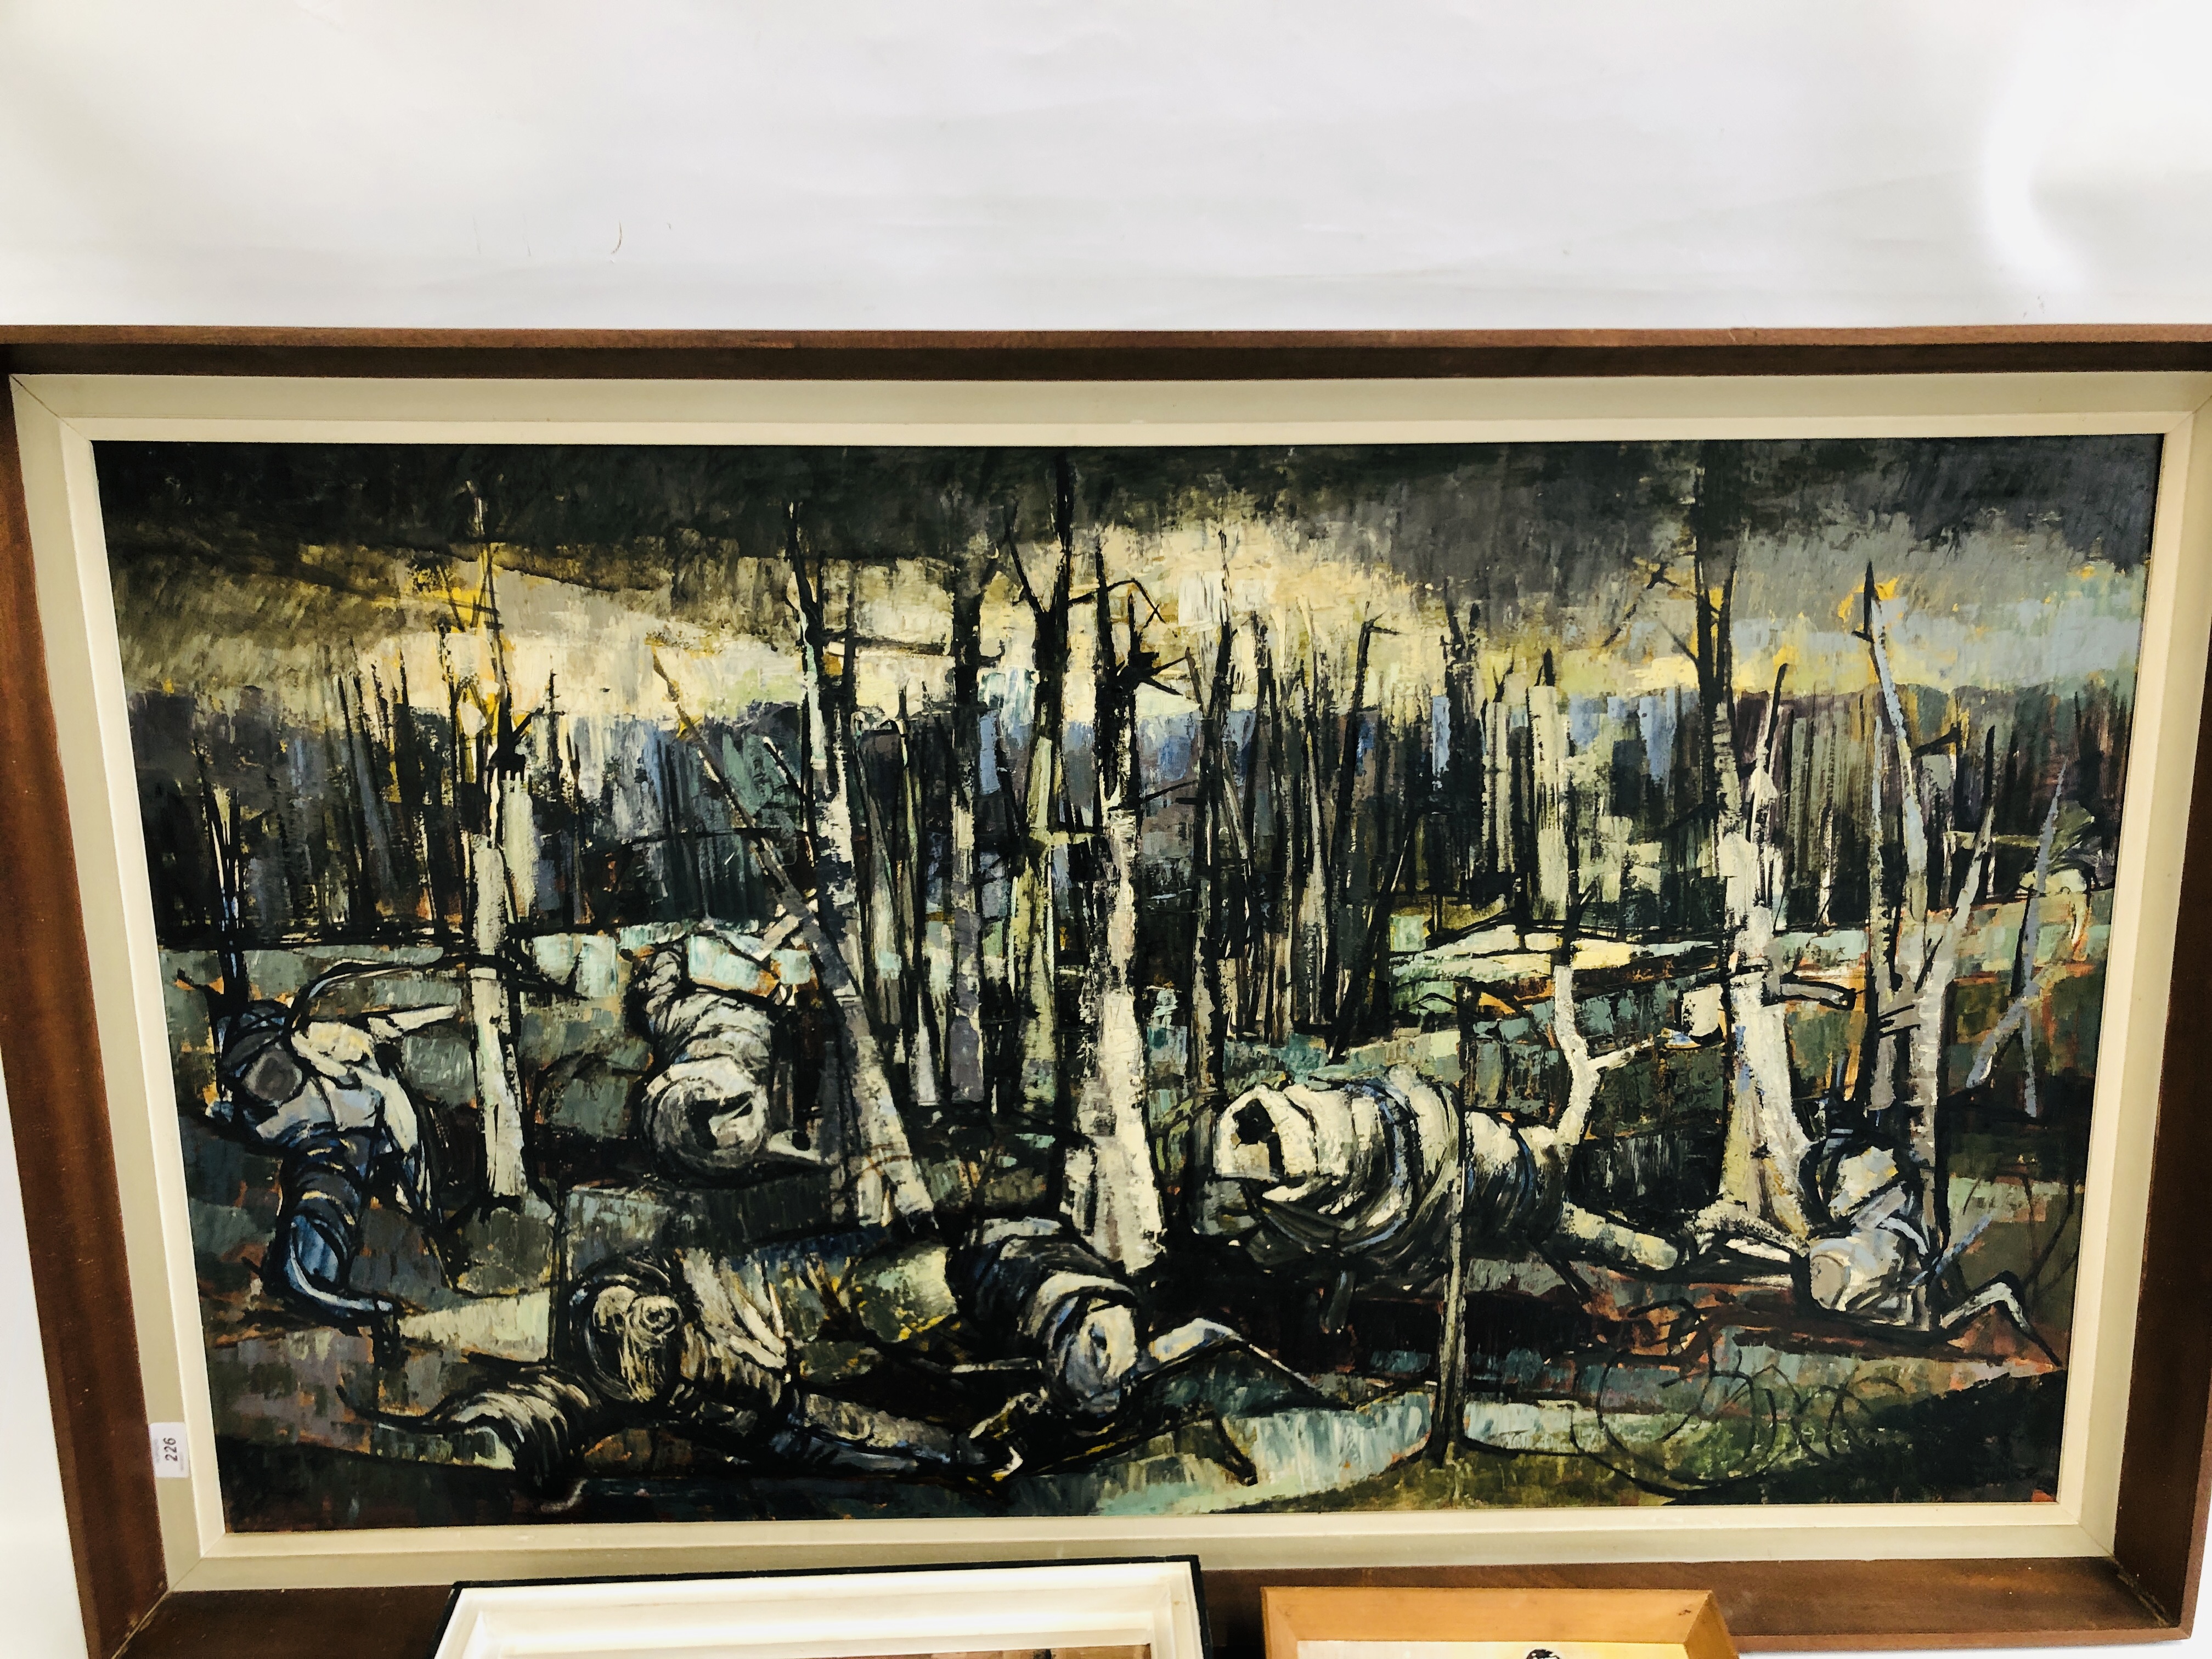 WHS BUNCE OIL ON BOARD "WOOD DEVASTATED BY FIRE" 69 X 120 CM. - Image 2 of 7